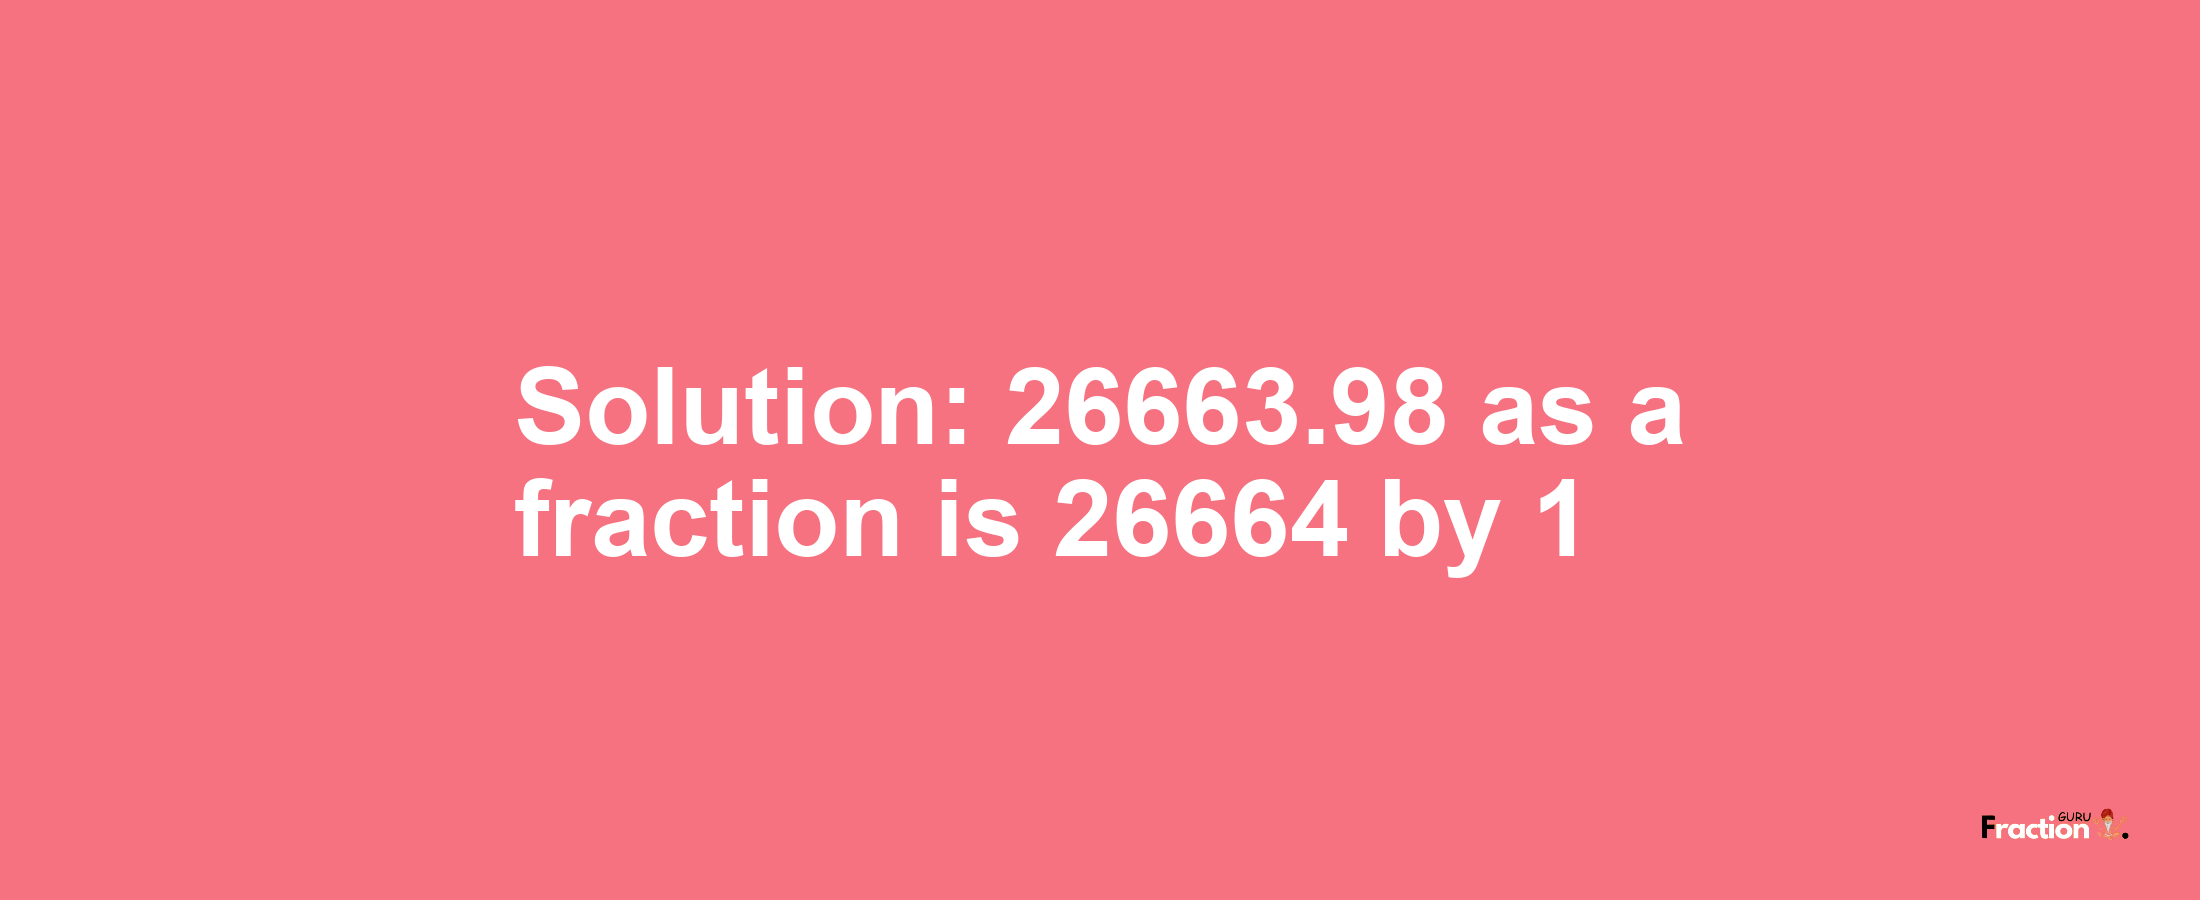 Solution:26663.98 as a fraction is 26664/1